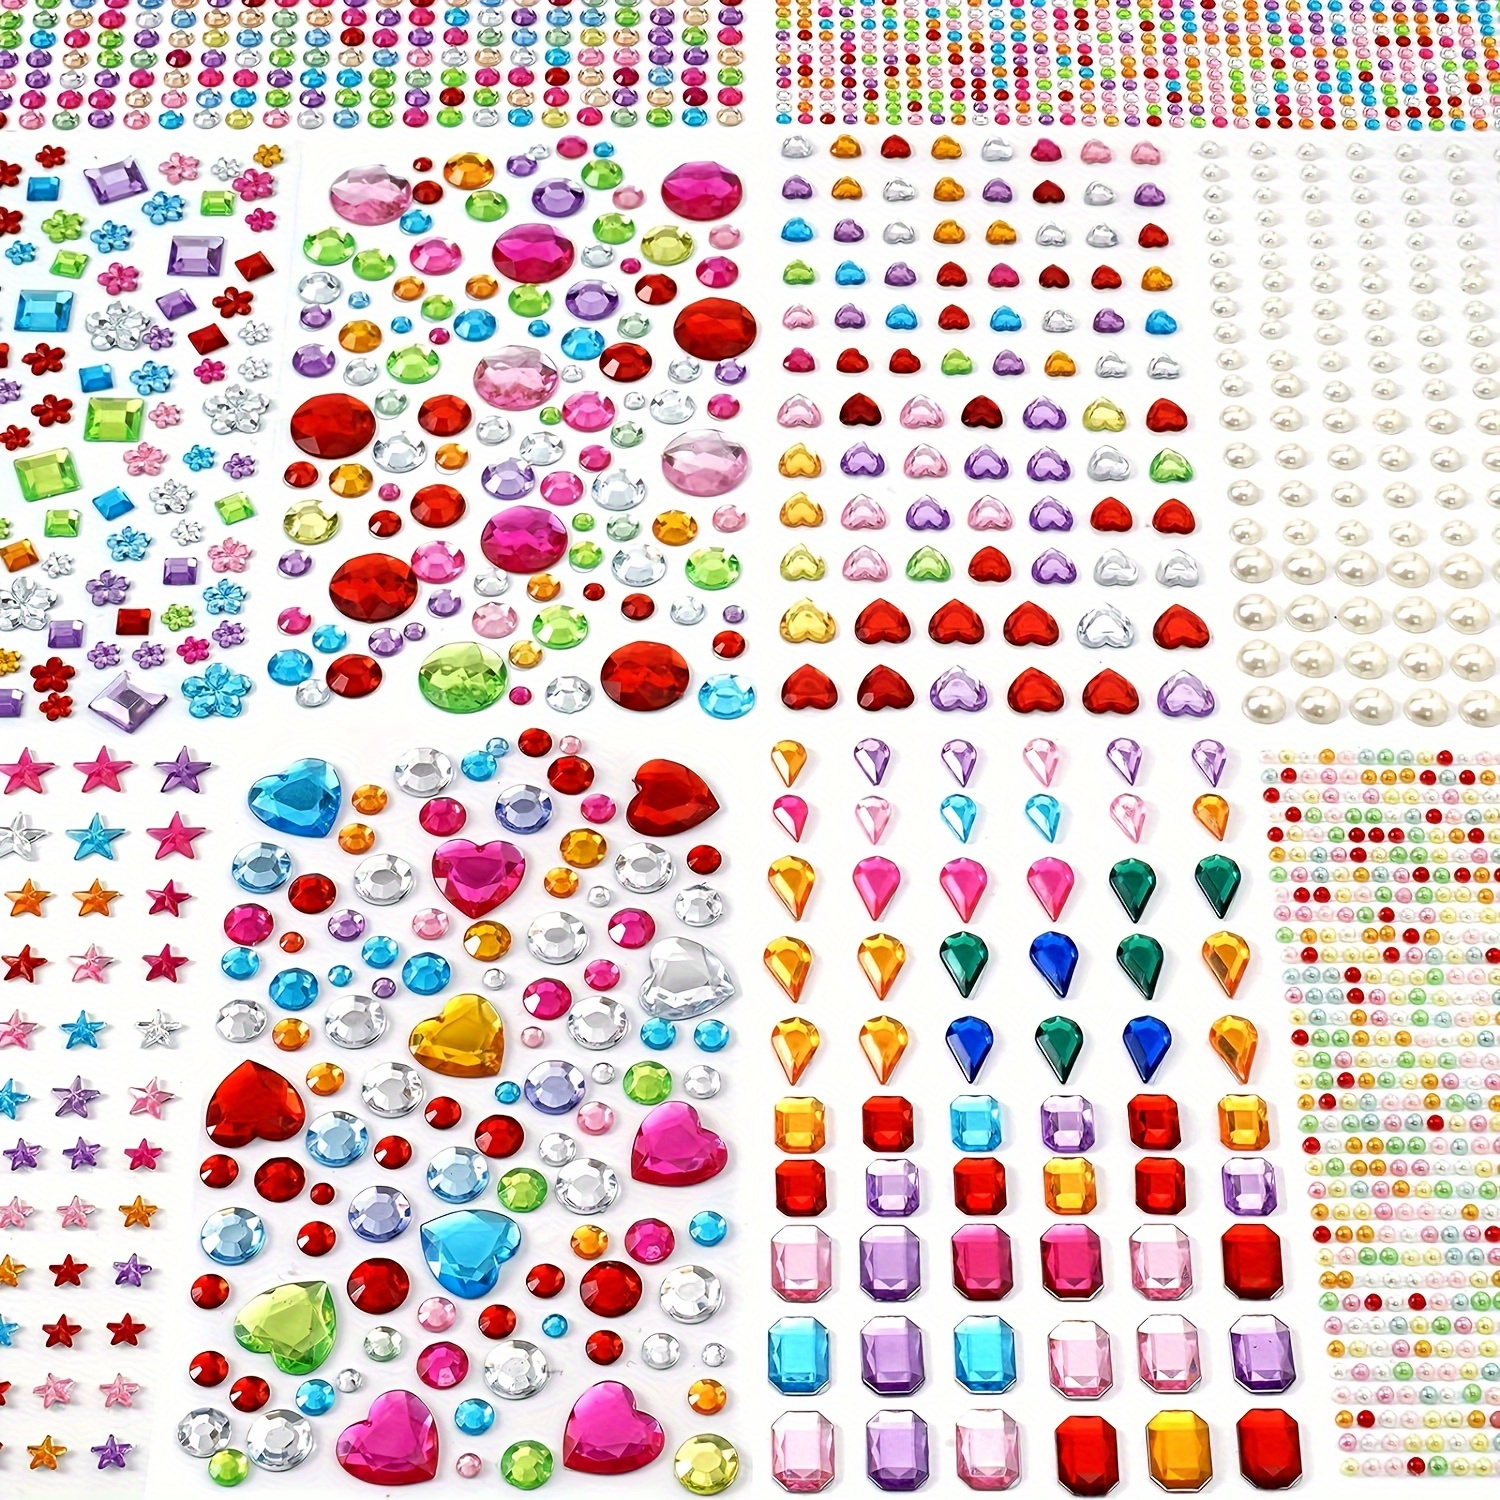 

10sheet Gem Stickers Jewels For Crafts - Self Adhesive Rhinestone Jewel Stickers 2774pcs Acrylic Bling Heart Valentine's Day Stickers Face Gems Glitters Diy Makeup